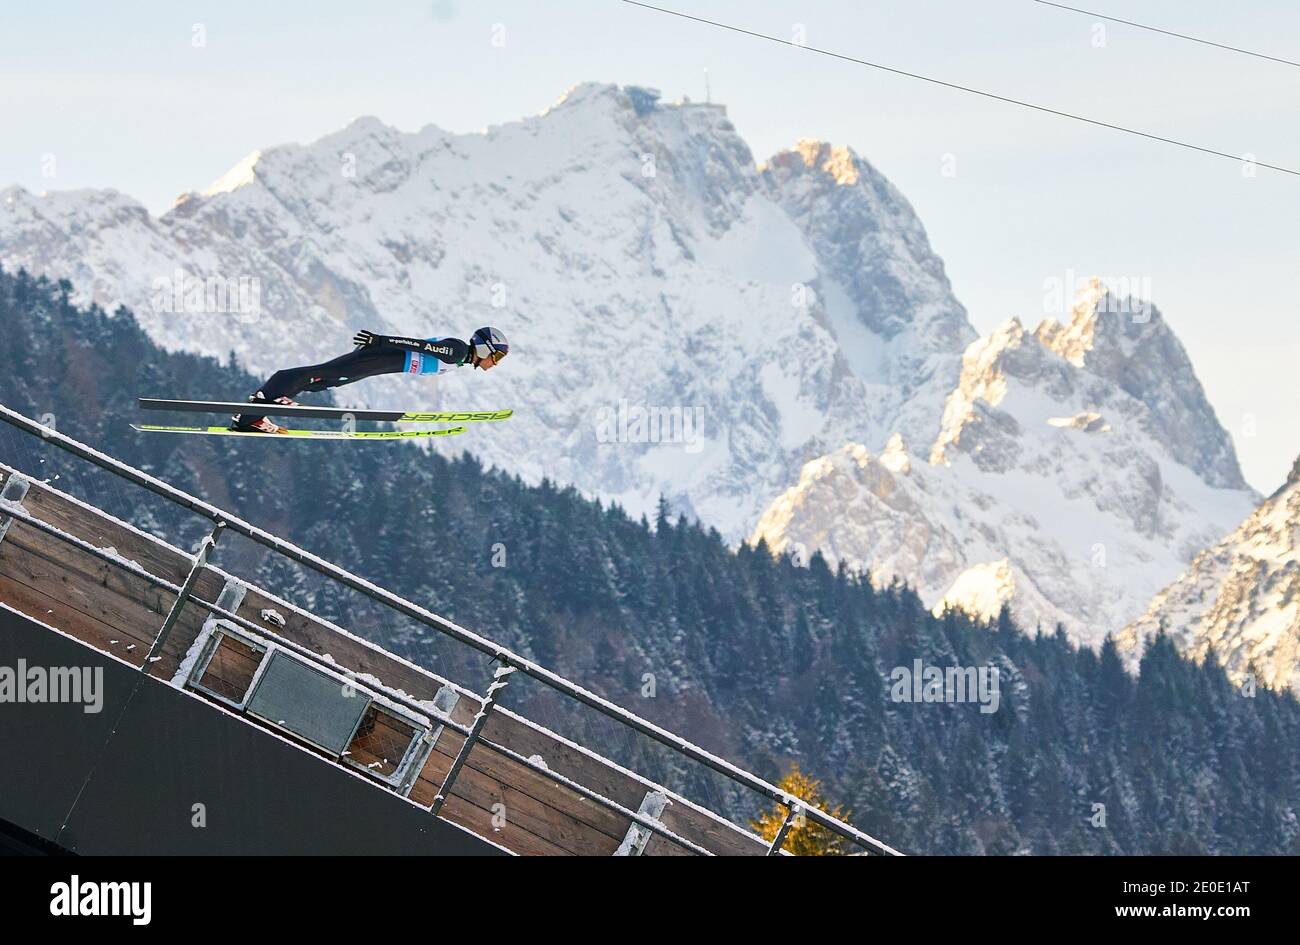 Andreas WELLINGER, GER in action in front of Zugspitze mountain at the Four Hills Tournament Ski Jumping at Olympic Stadium, Grosse Olympiaschanze in Garmisch-Partenkirchen, Bavaria, Germany, December 31, 2020.  © Peter Schatz / Alamy Live News Stock Photo